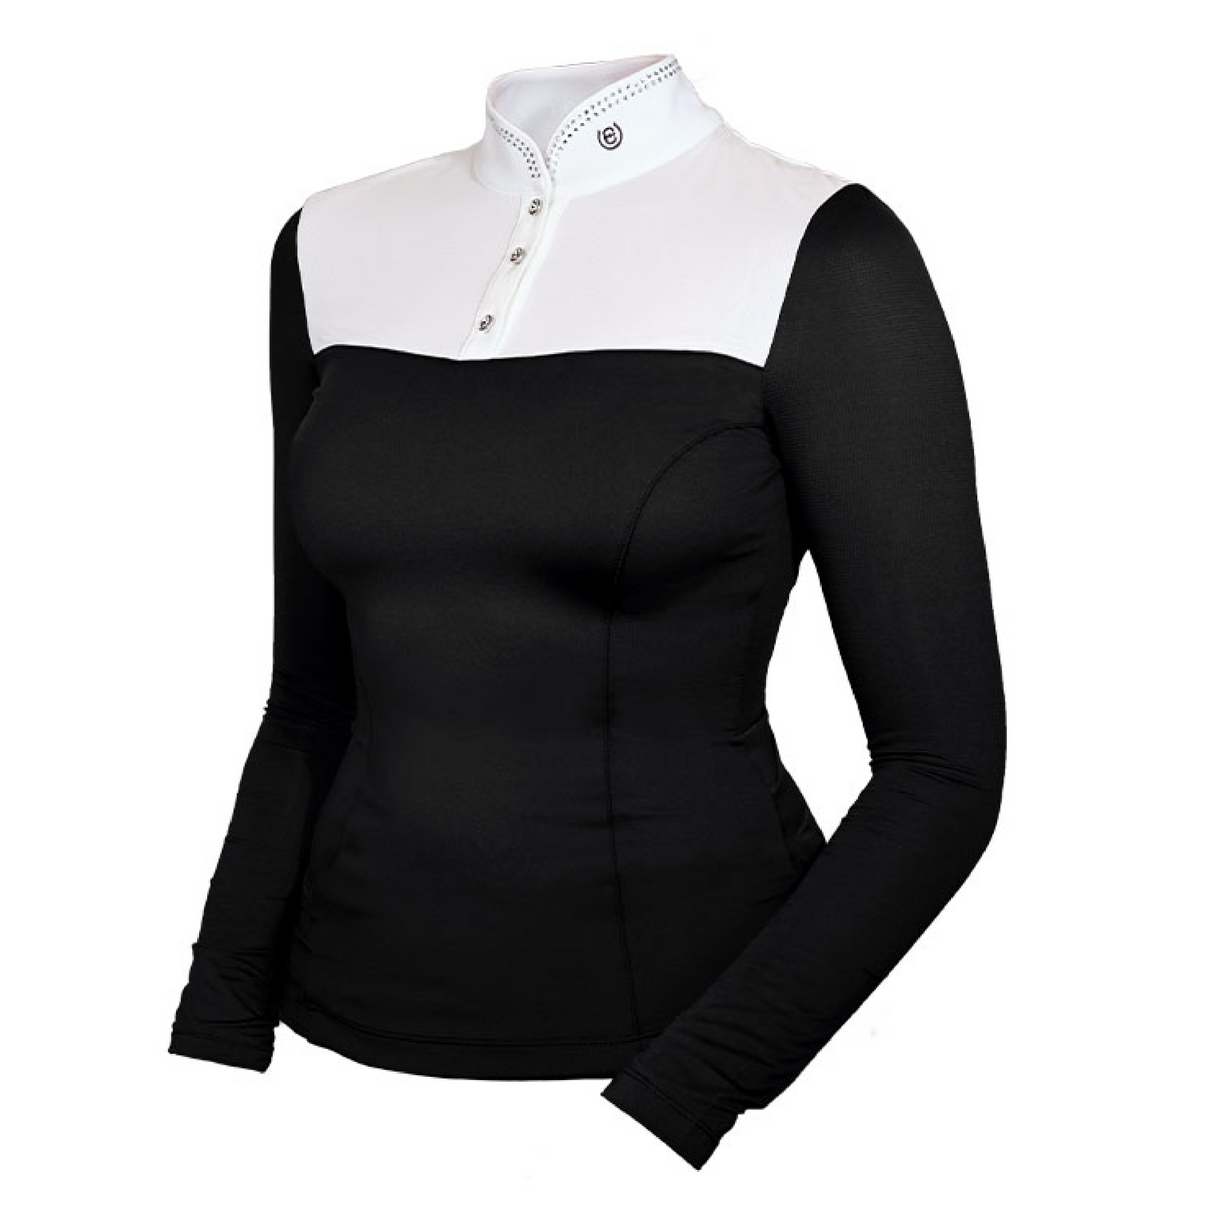 Equestrian Stockholm Revenew Long Sleeve Competition Top Black Edition